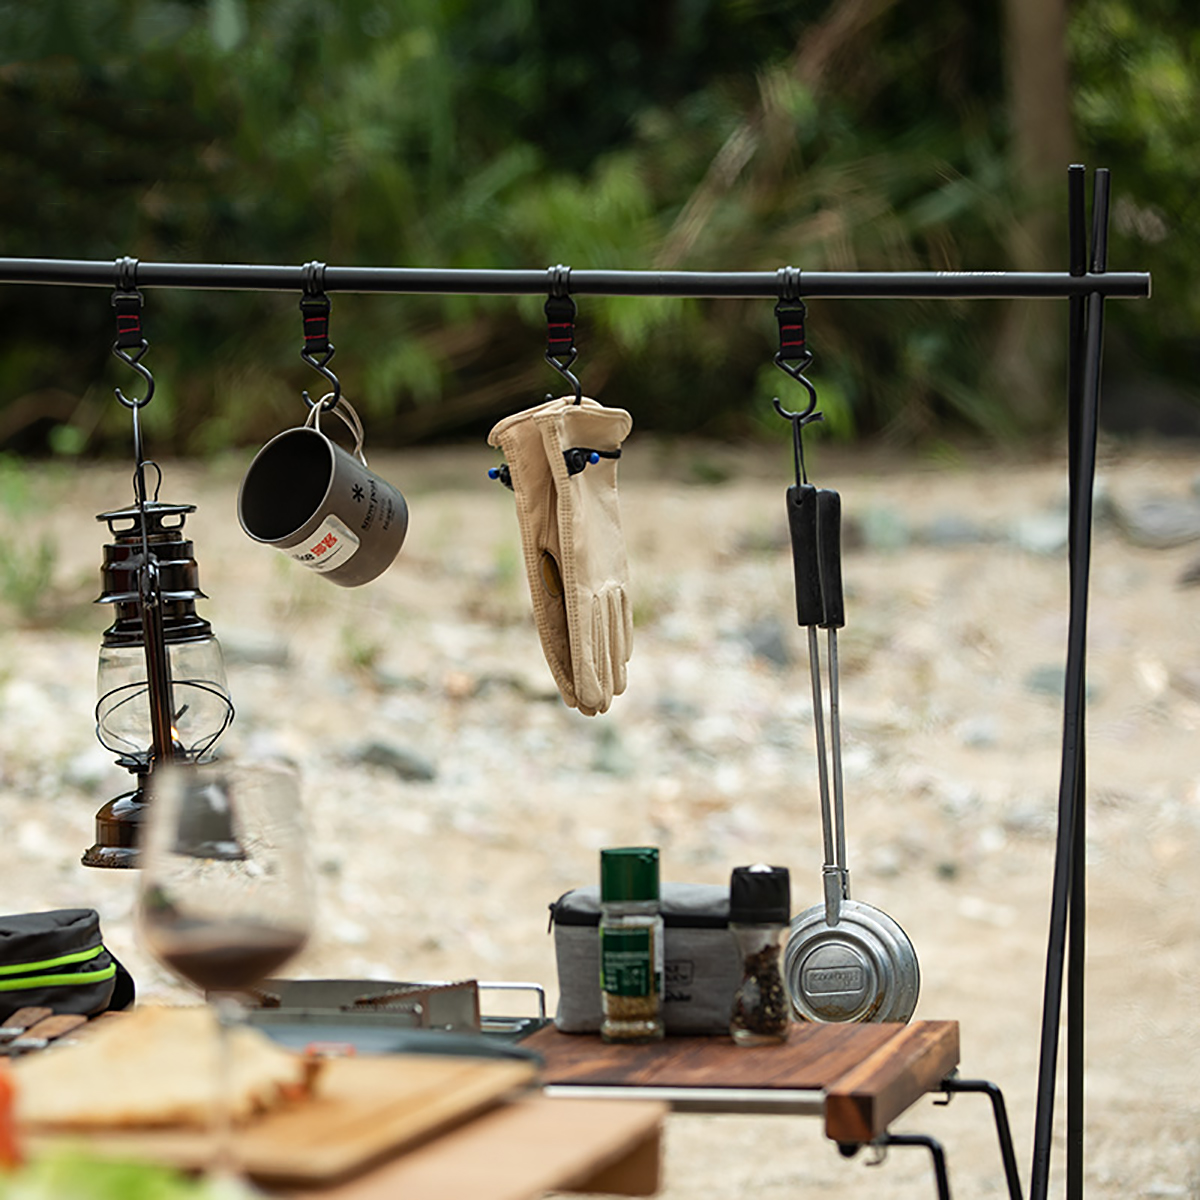 Ultralight-Hanging-Rack-Folding-Cookware-Storage-Triangle-Racks-Clothes-Shelf-Up-to-8kg-Outdoor-Camp-1780193-7